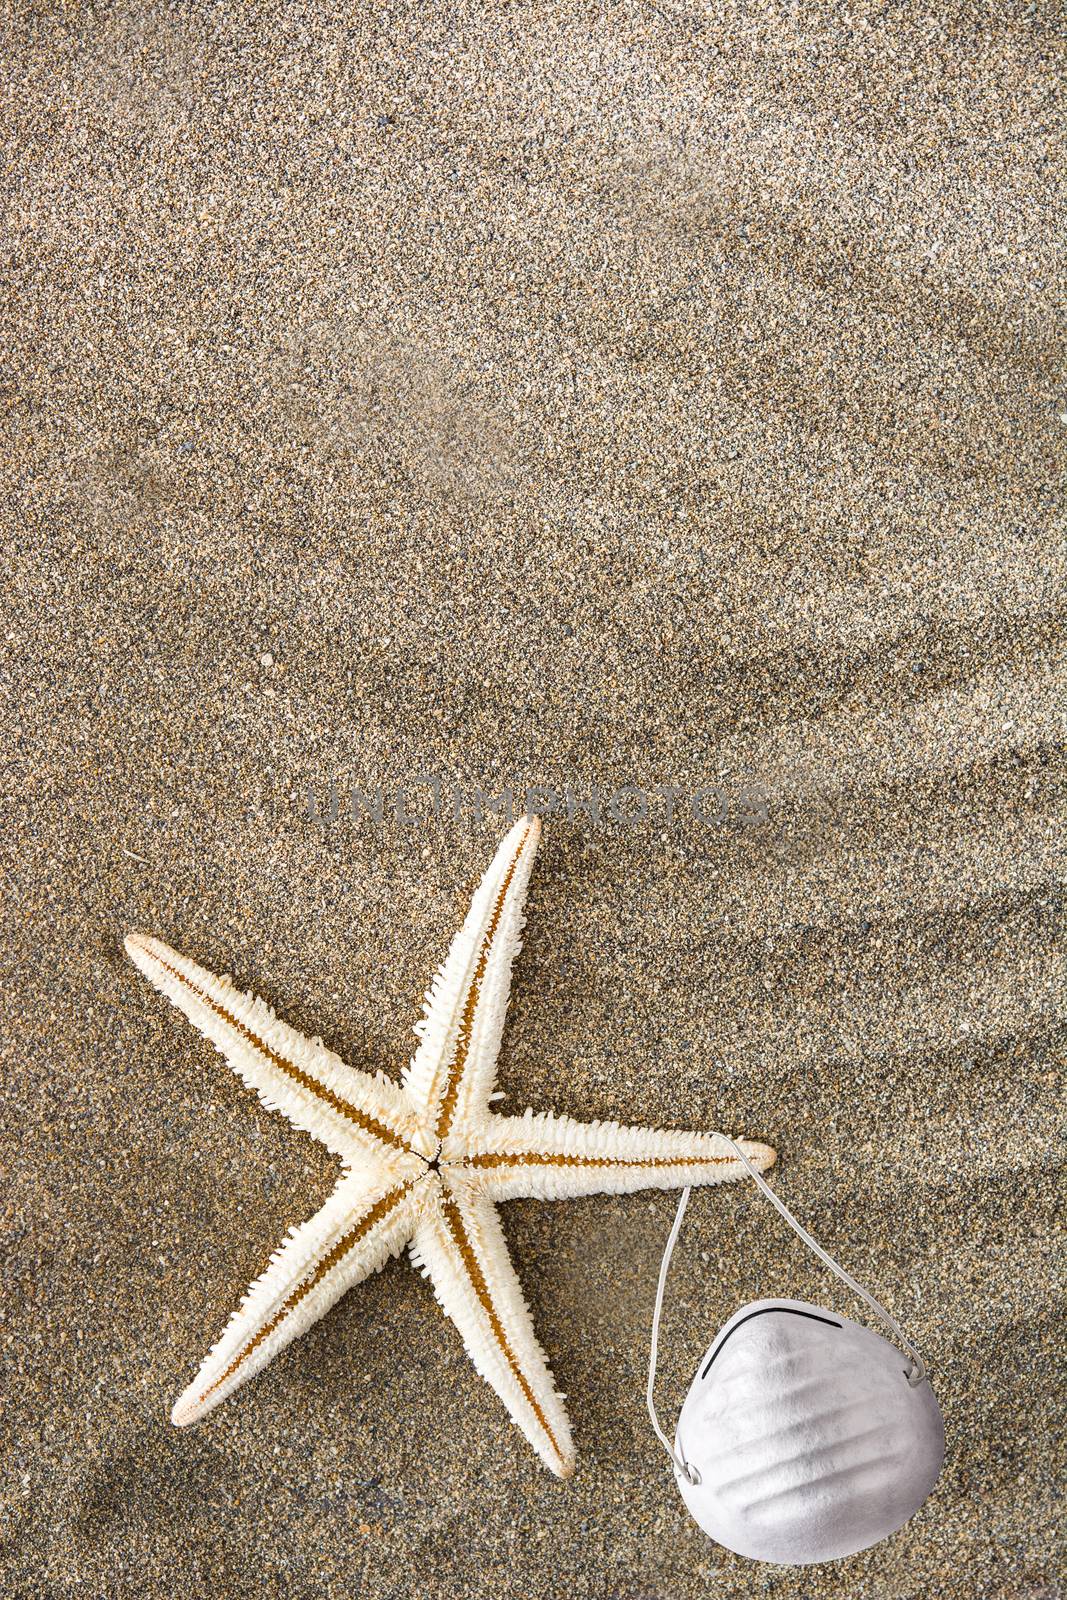 Medical protective mask and starfish on sand by chandlervid85